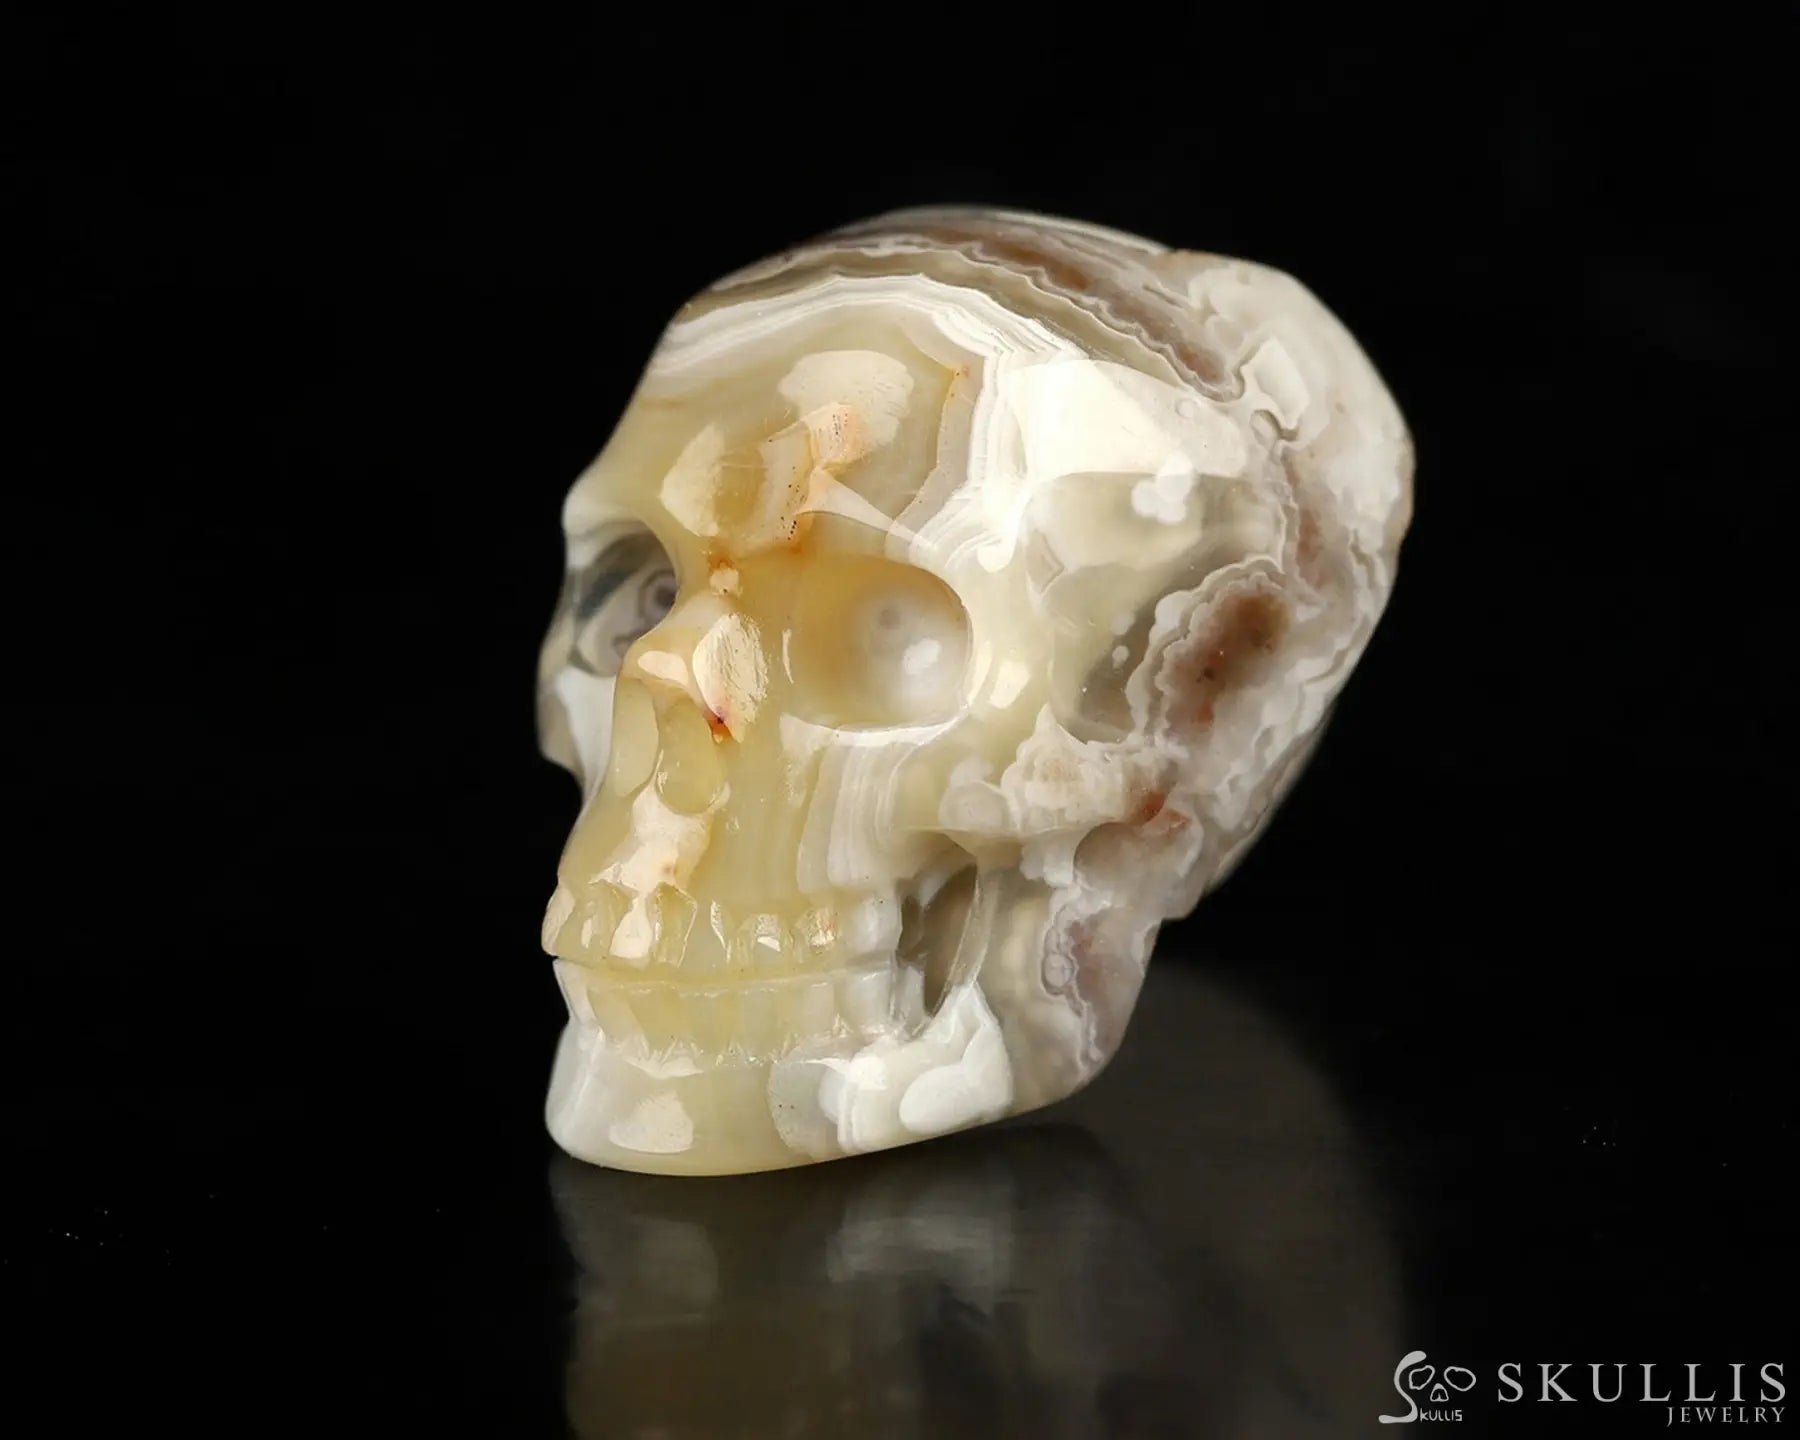 Gem Skull Of Red Crazy Lace Agate Carved Realistic Tiny Gemstone